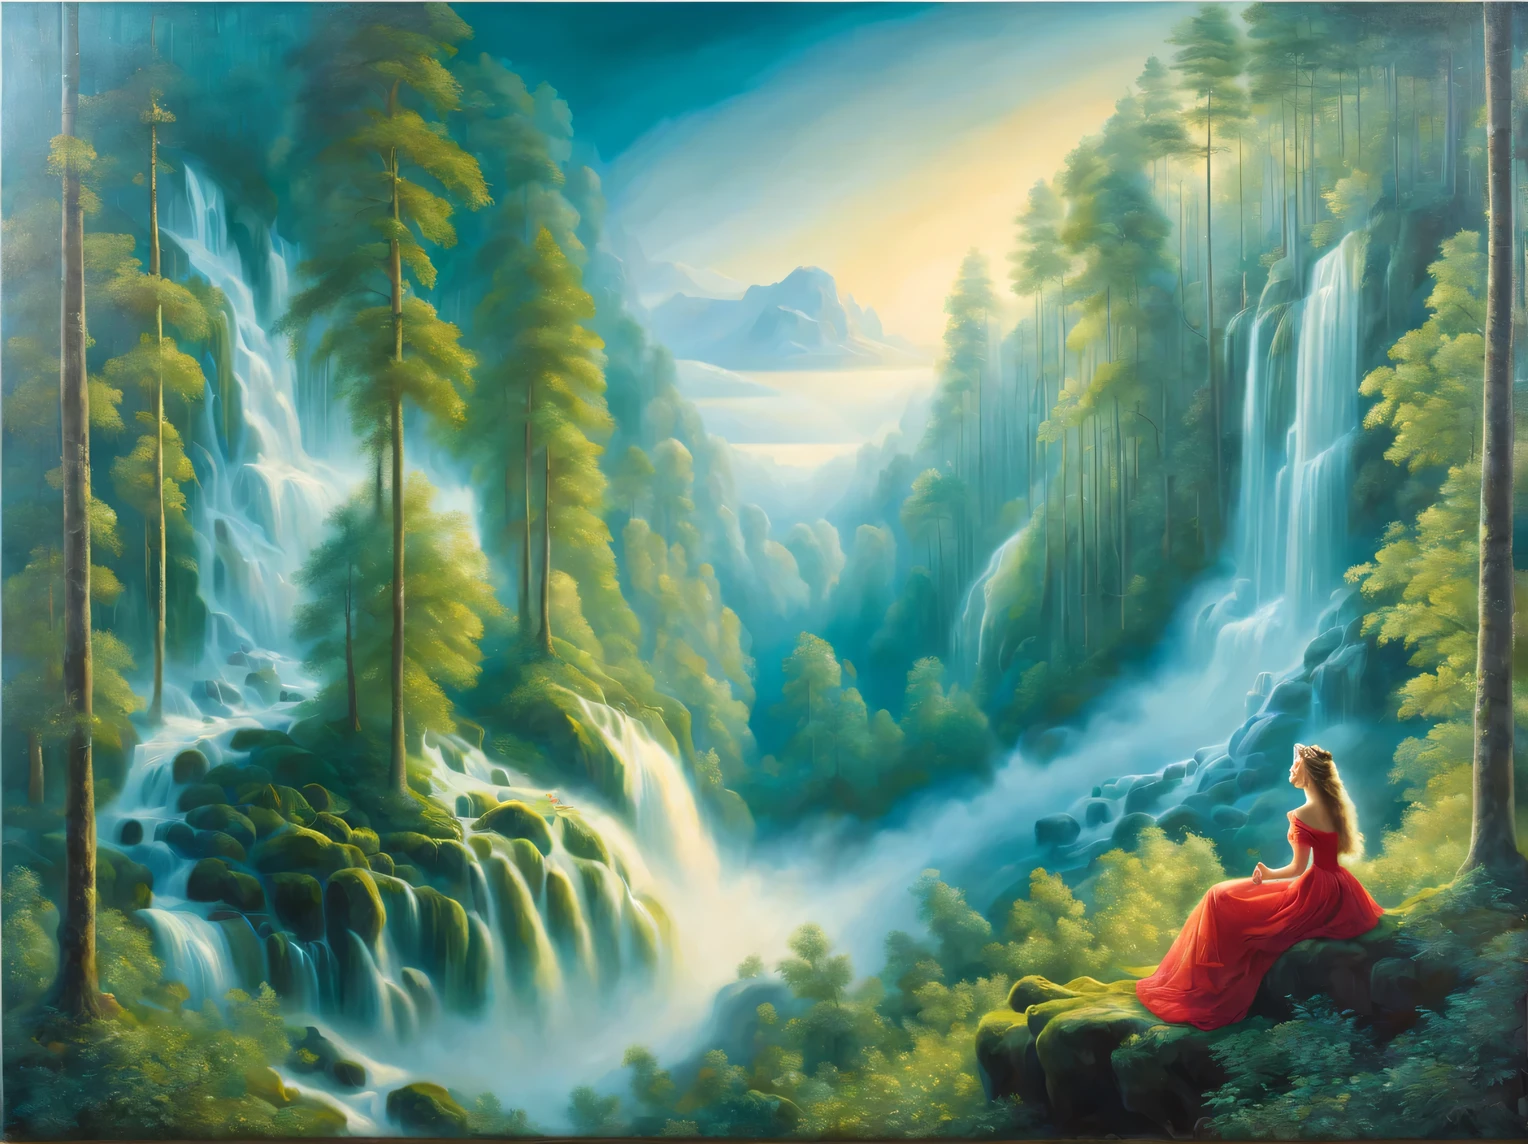 Oil painting on canvas oil painting on canvas with double exposure effect, a beautiful southern princess dreams of a beautiful forest waterfall, forest waterfall like a misty dream of a beautiful princess in the background, Hugh Douglas Hamilton, Alexey Savrasov, Fedor Vasiliev, Rob Gonsalves, Peder Monstead, double exposure:1.3